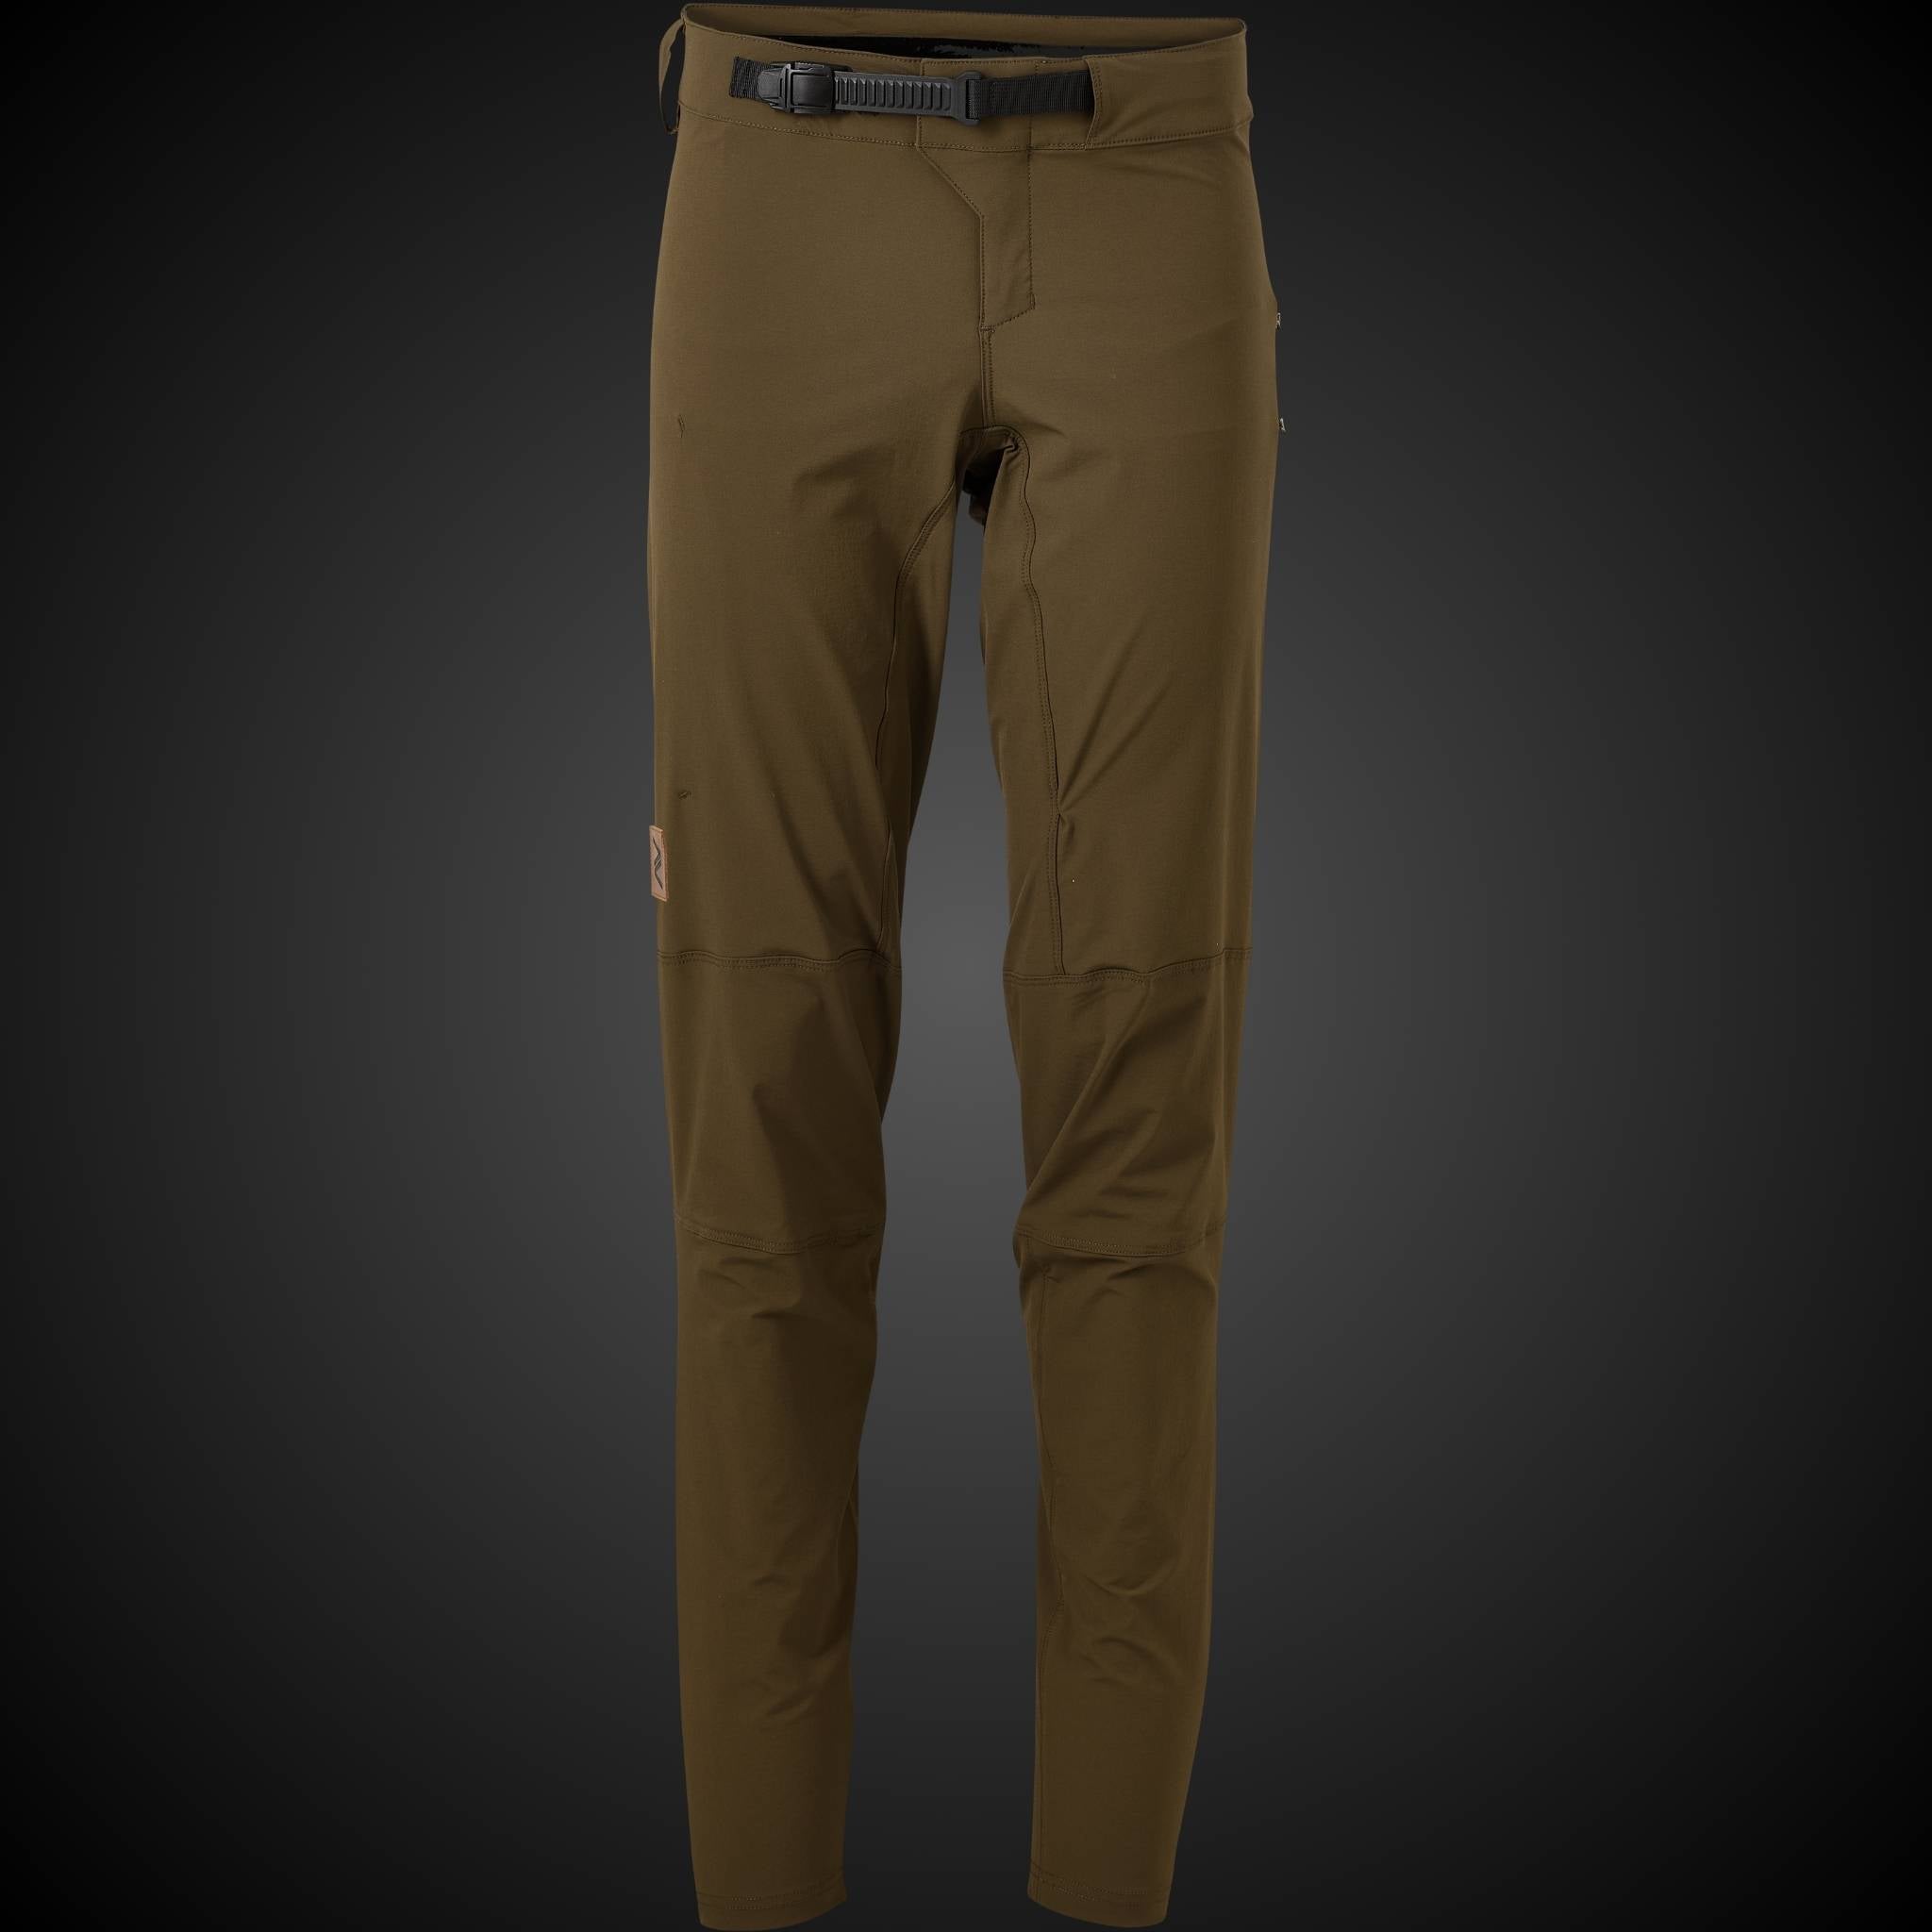 Khaki Gravity 1.02 mountain bike pants designed for rugged terrain, offering comfort and resilience in all weather conditions.